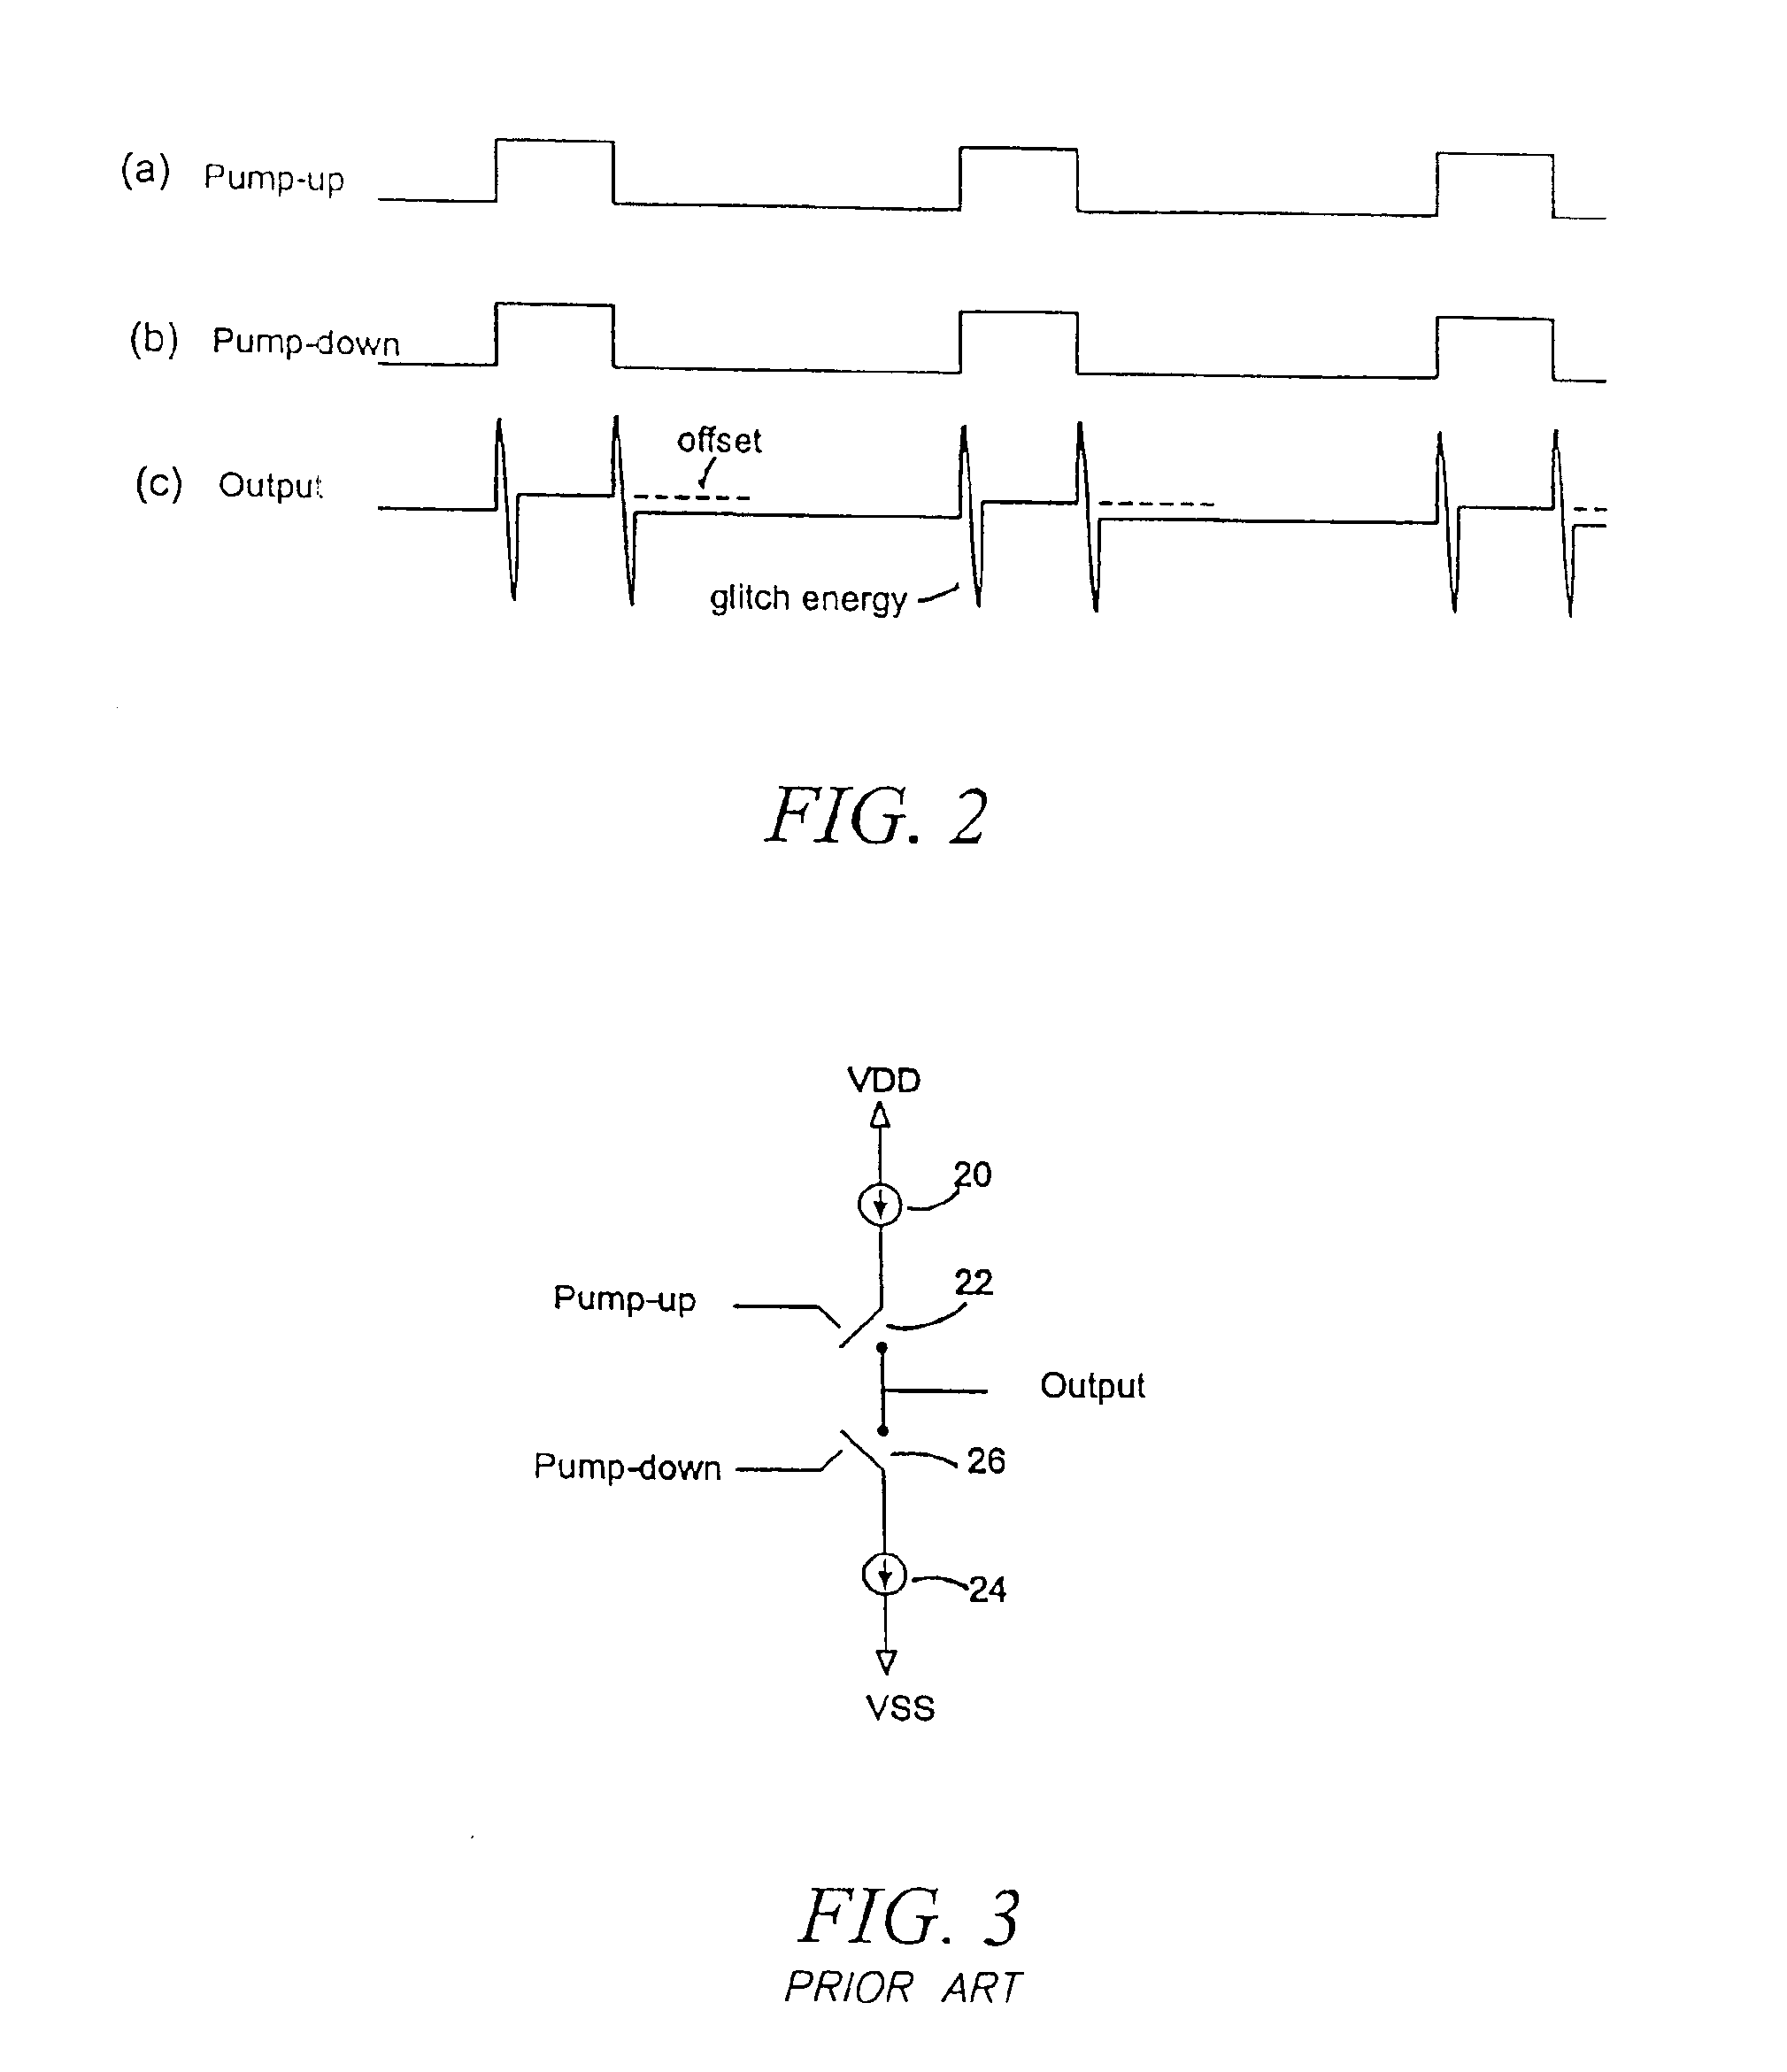 Low offset and low glitch energy charge pump for PLL-based timing recovery systems